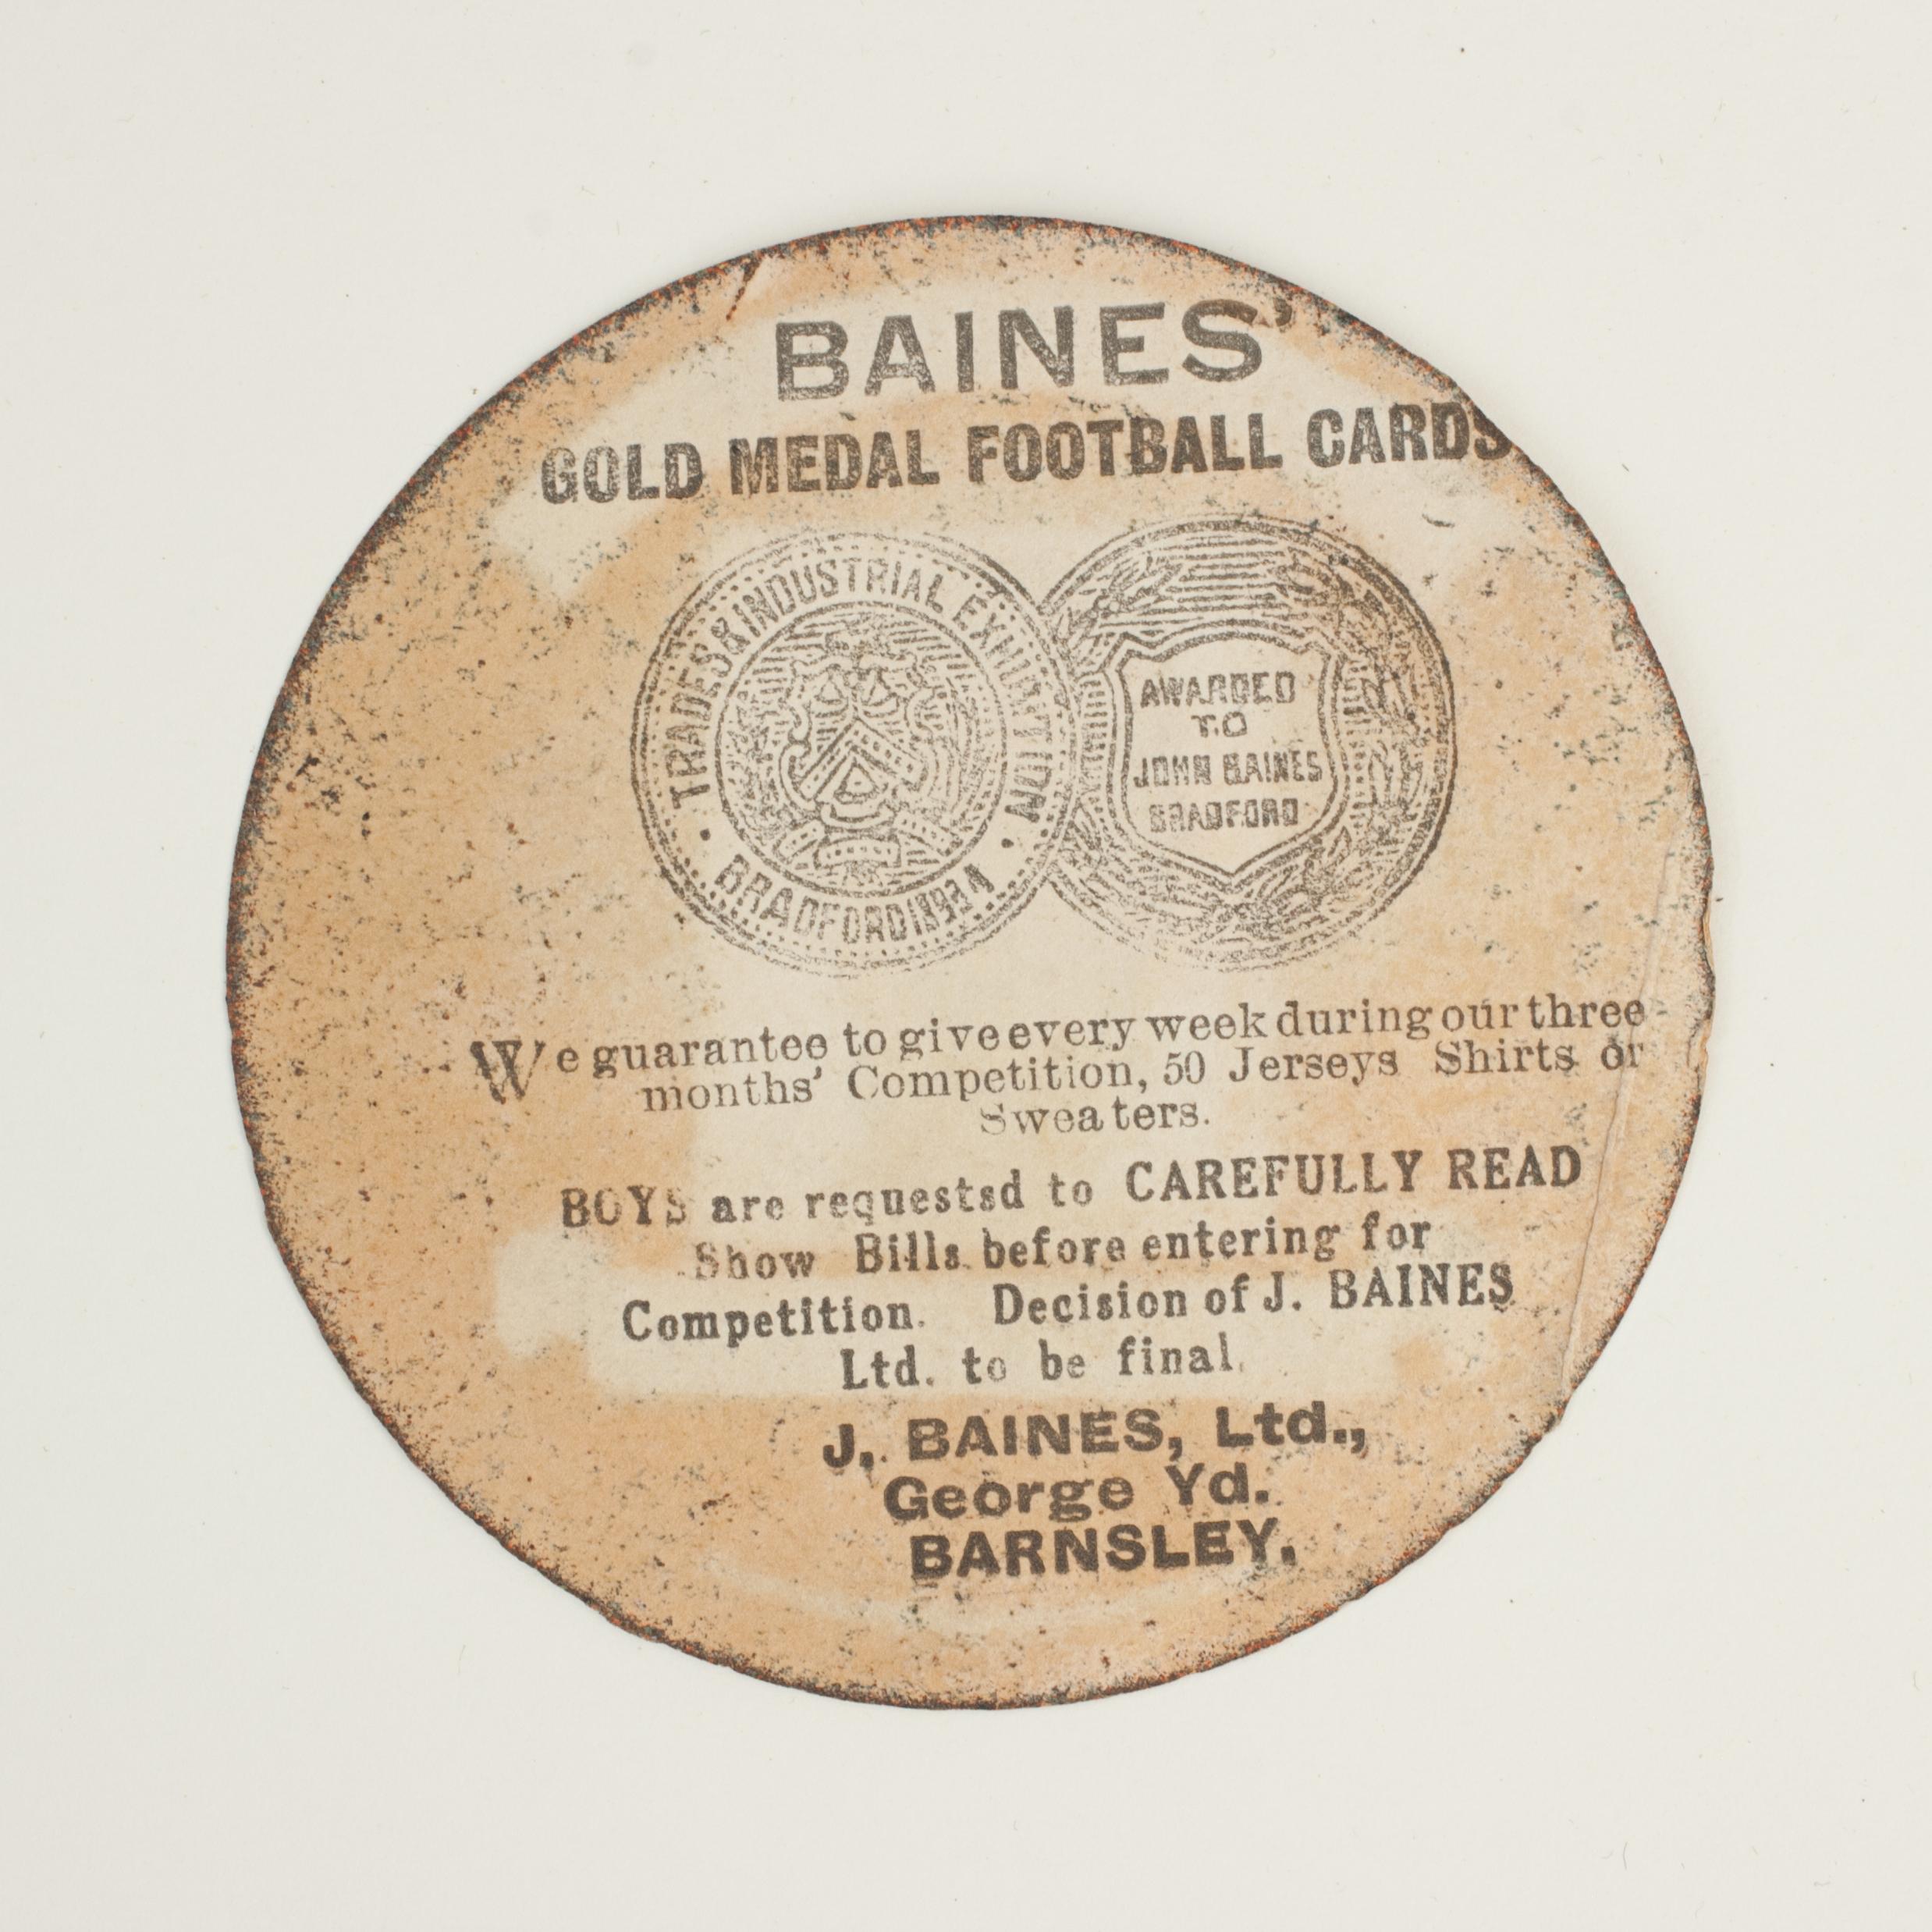 Baines football trade card, Middlesbro. Well Played.
A rare circular football trade card in the shape of a leather football ball. Made by the toy shop owner from Bradford, John Baines. Baines went on to produce not only football cards but